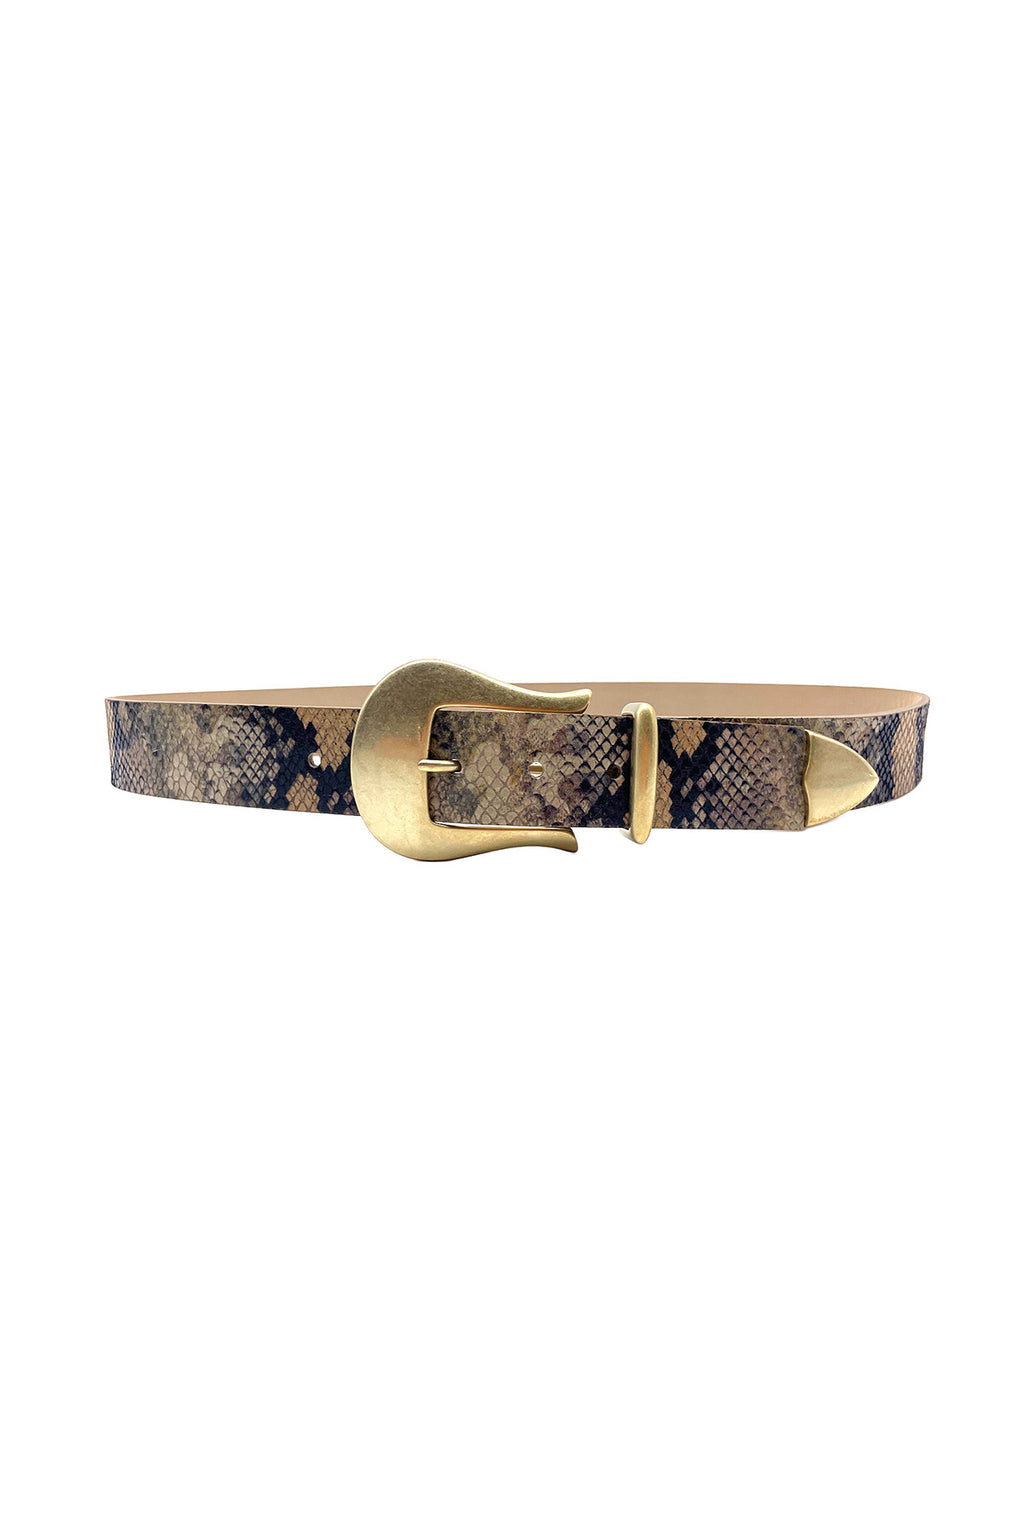 Tan/Navy Python Belt with Gold Buckle